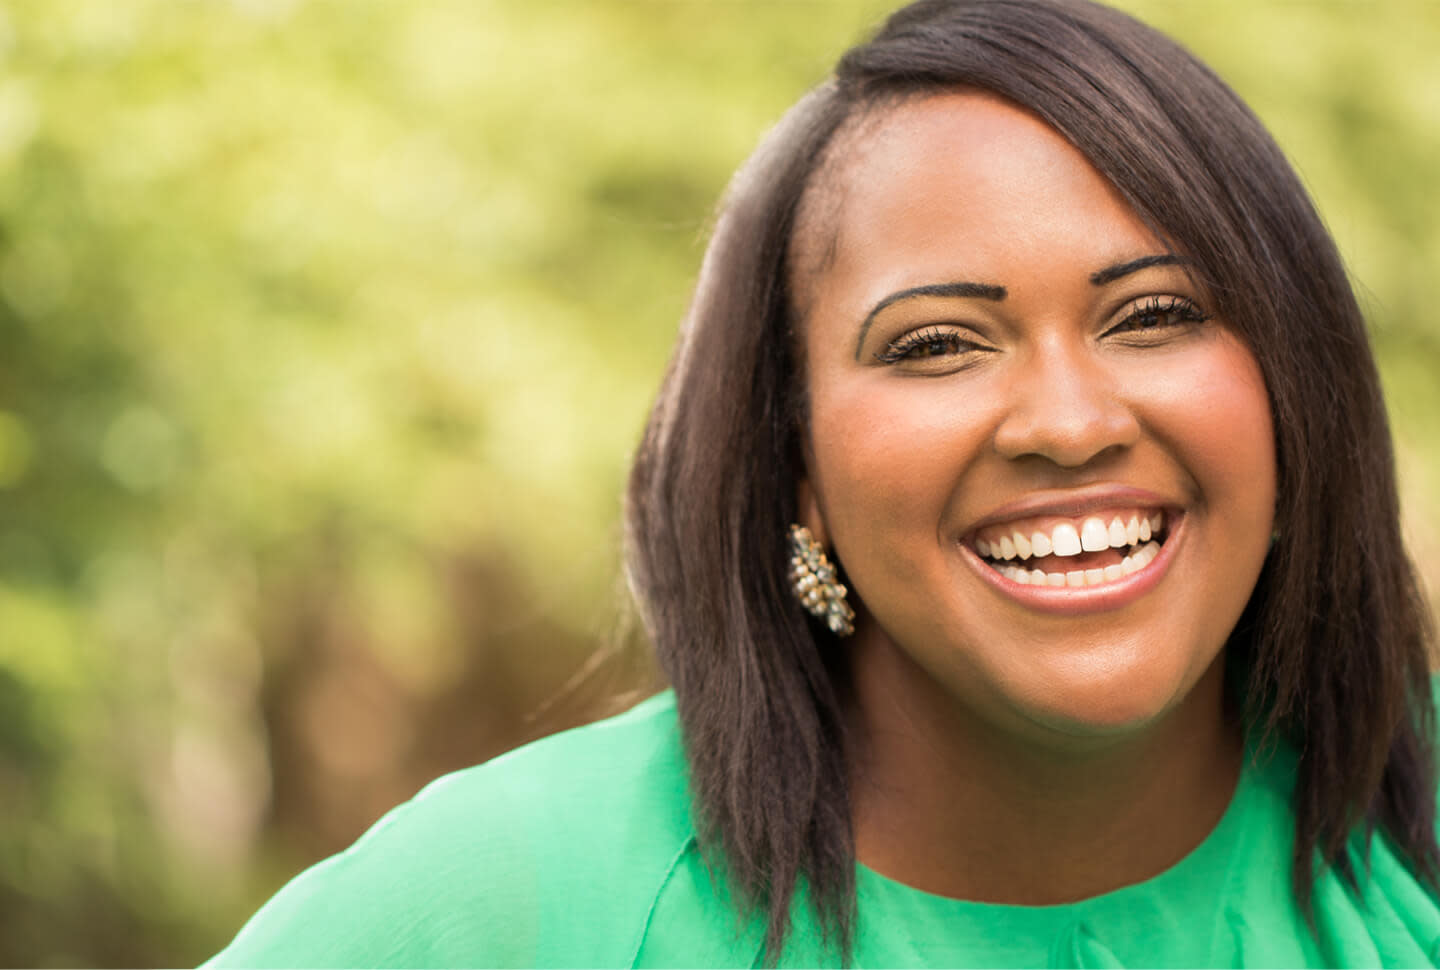 Smiling Black woman with relaxed hair in green shirt